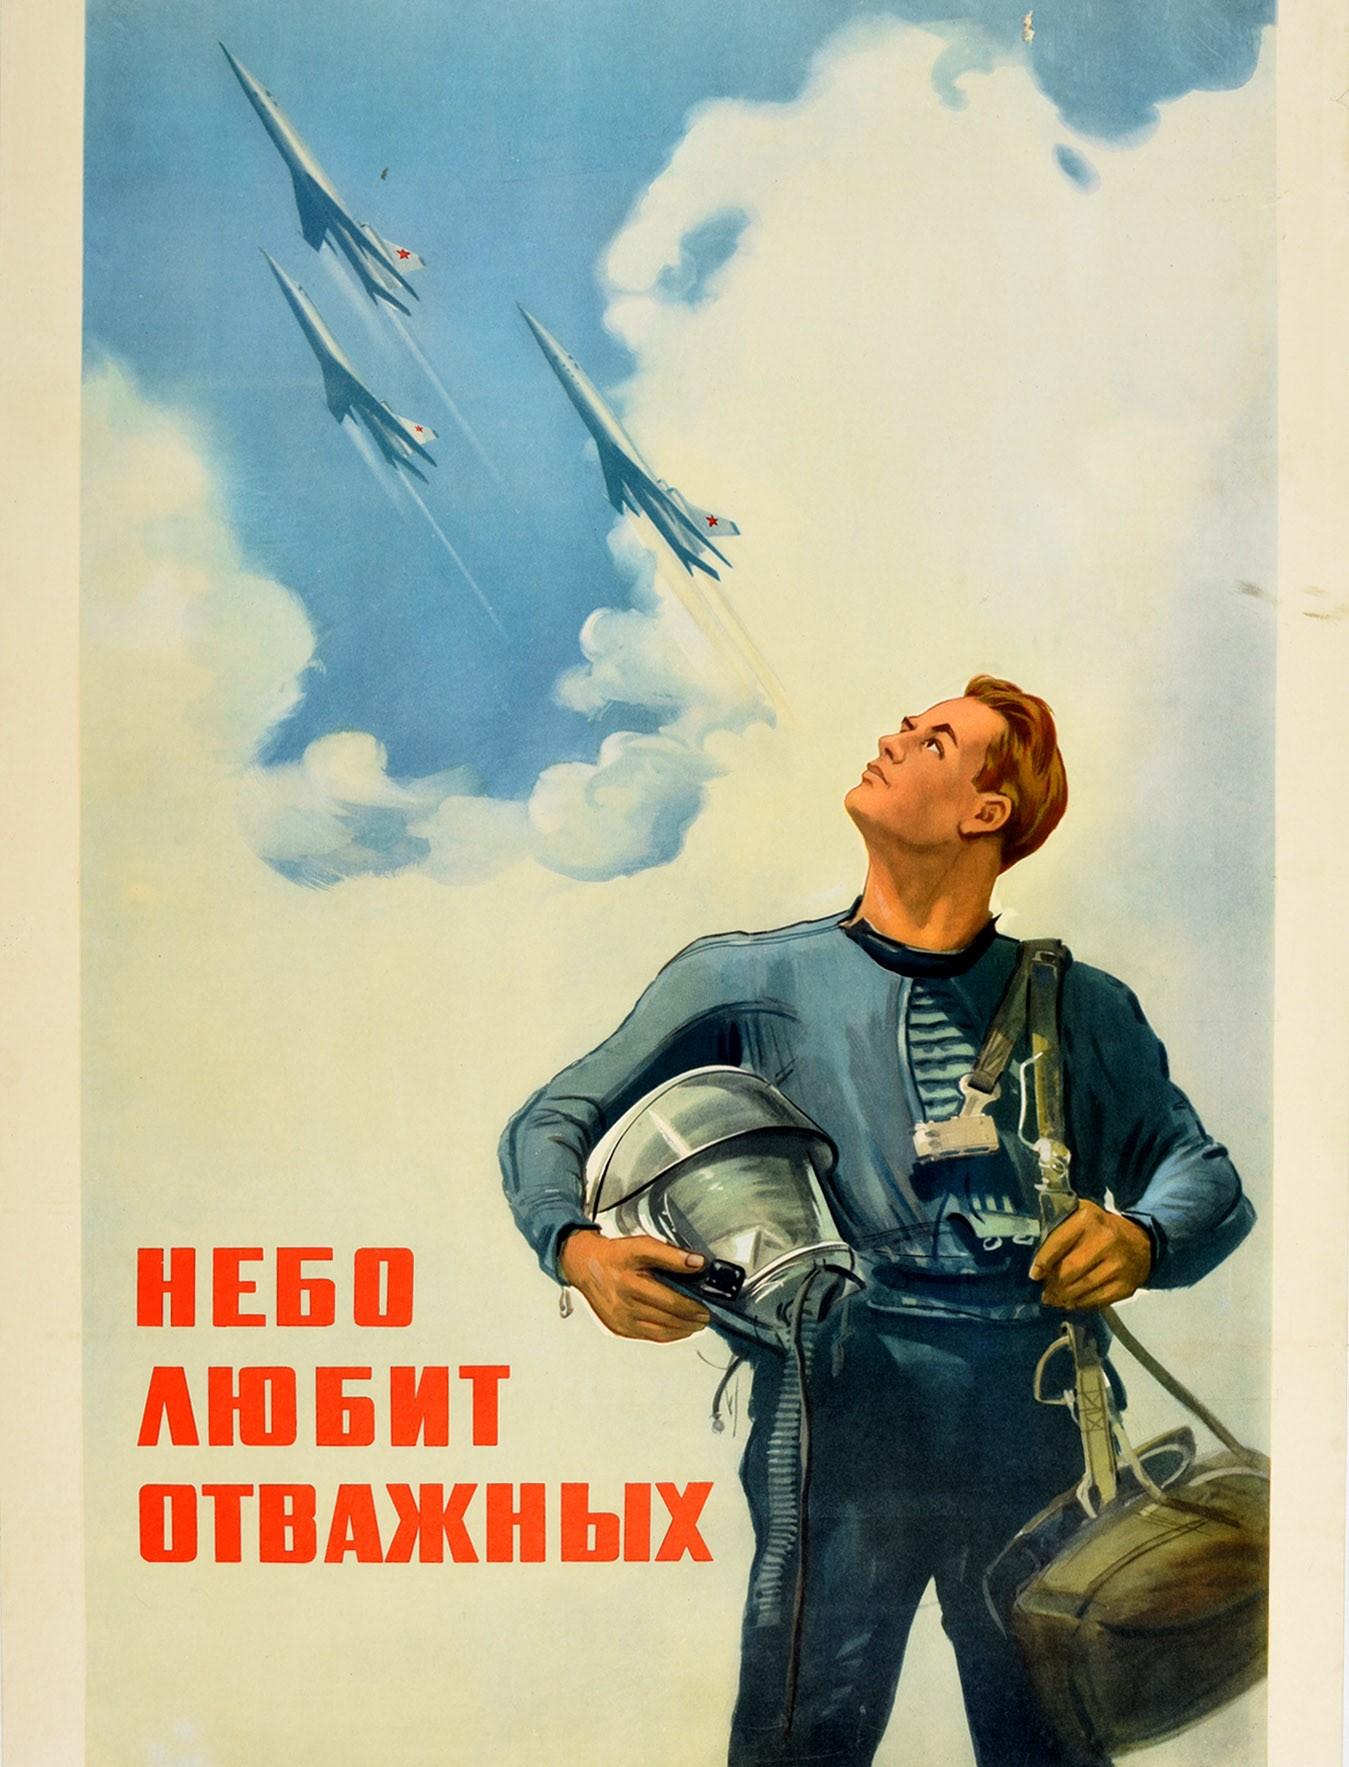 Original vintage Soviet propaganda poster - The Sky Loves The Brave / Небо любит отважных - featuring a pilot in uniform holding a helmet and looking up at fighter jet planes marked with red Soviet stars flying through the clouds above, the bold red